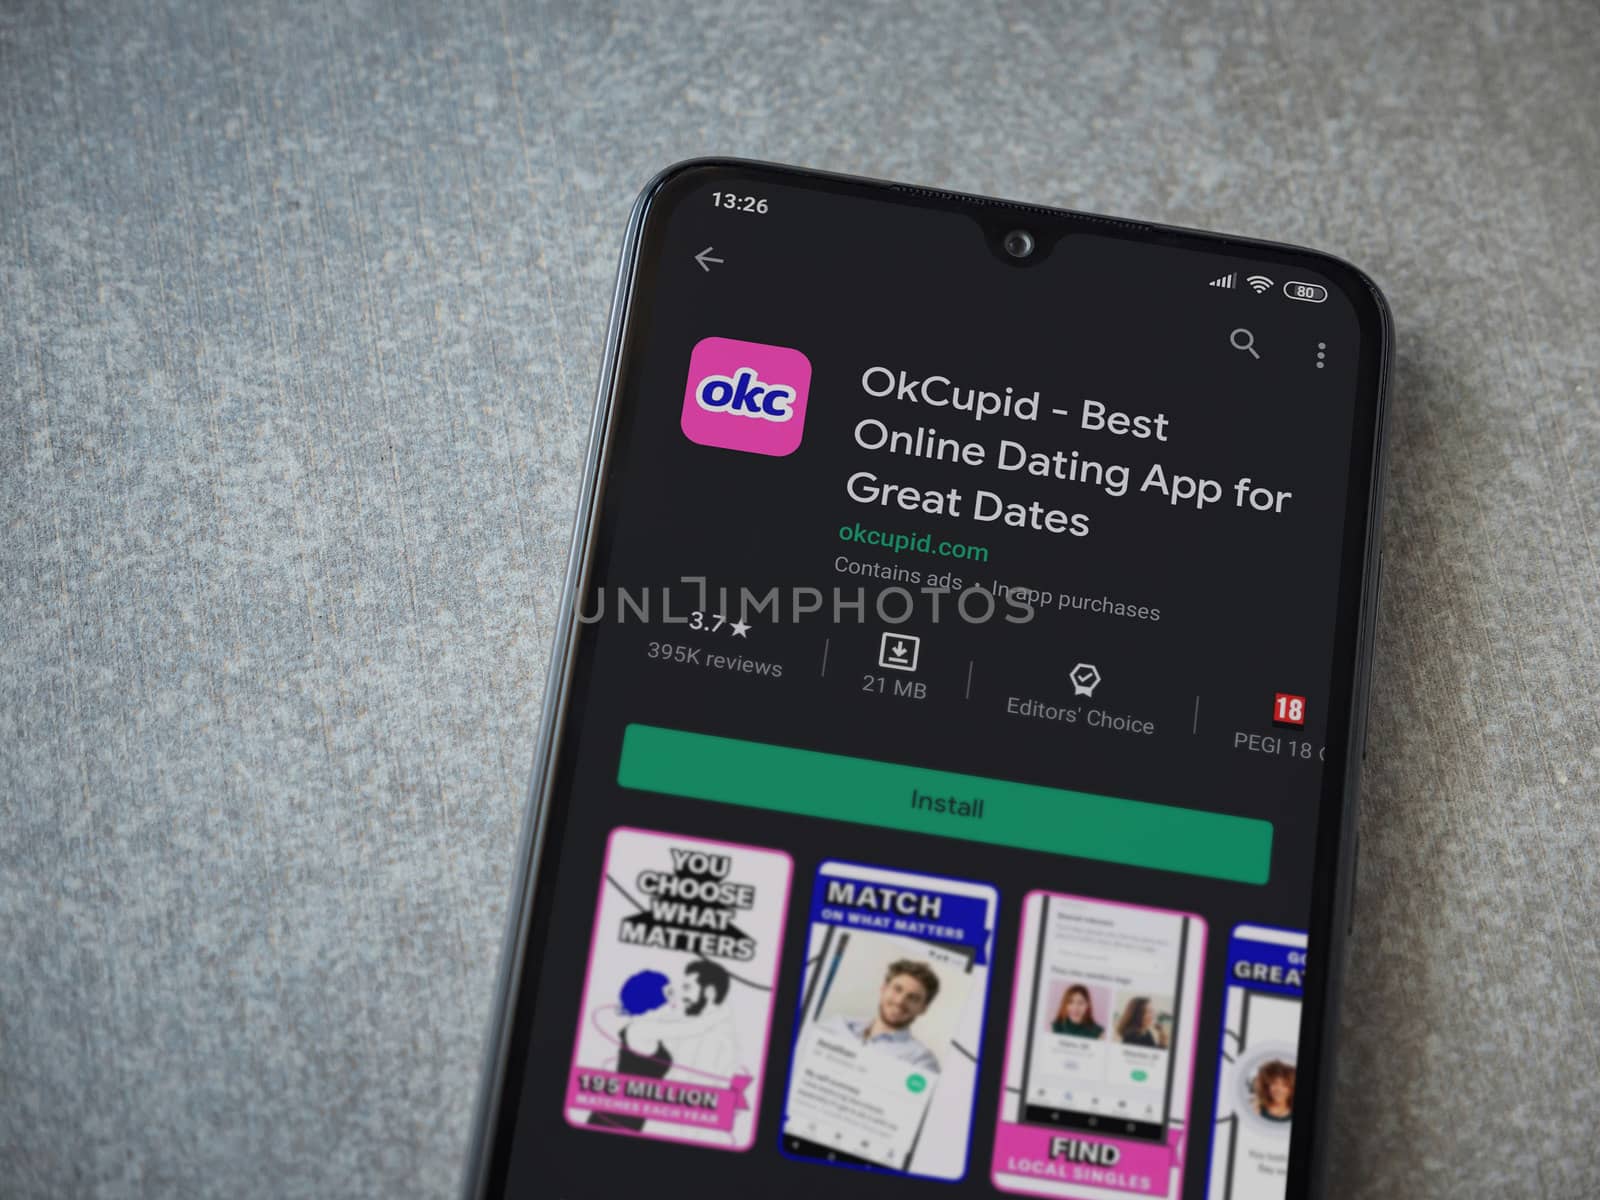 Lod, Israel - July 8, 2020: OkCupid app play store page on the display of a black mobile smartphone on ceramic stone background. Top view flat lay with copy space.